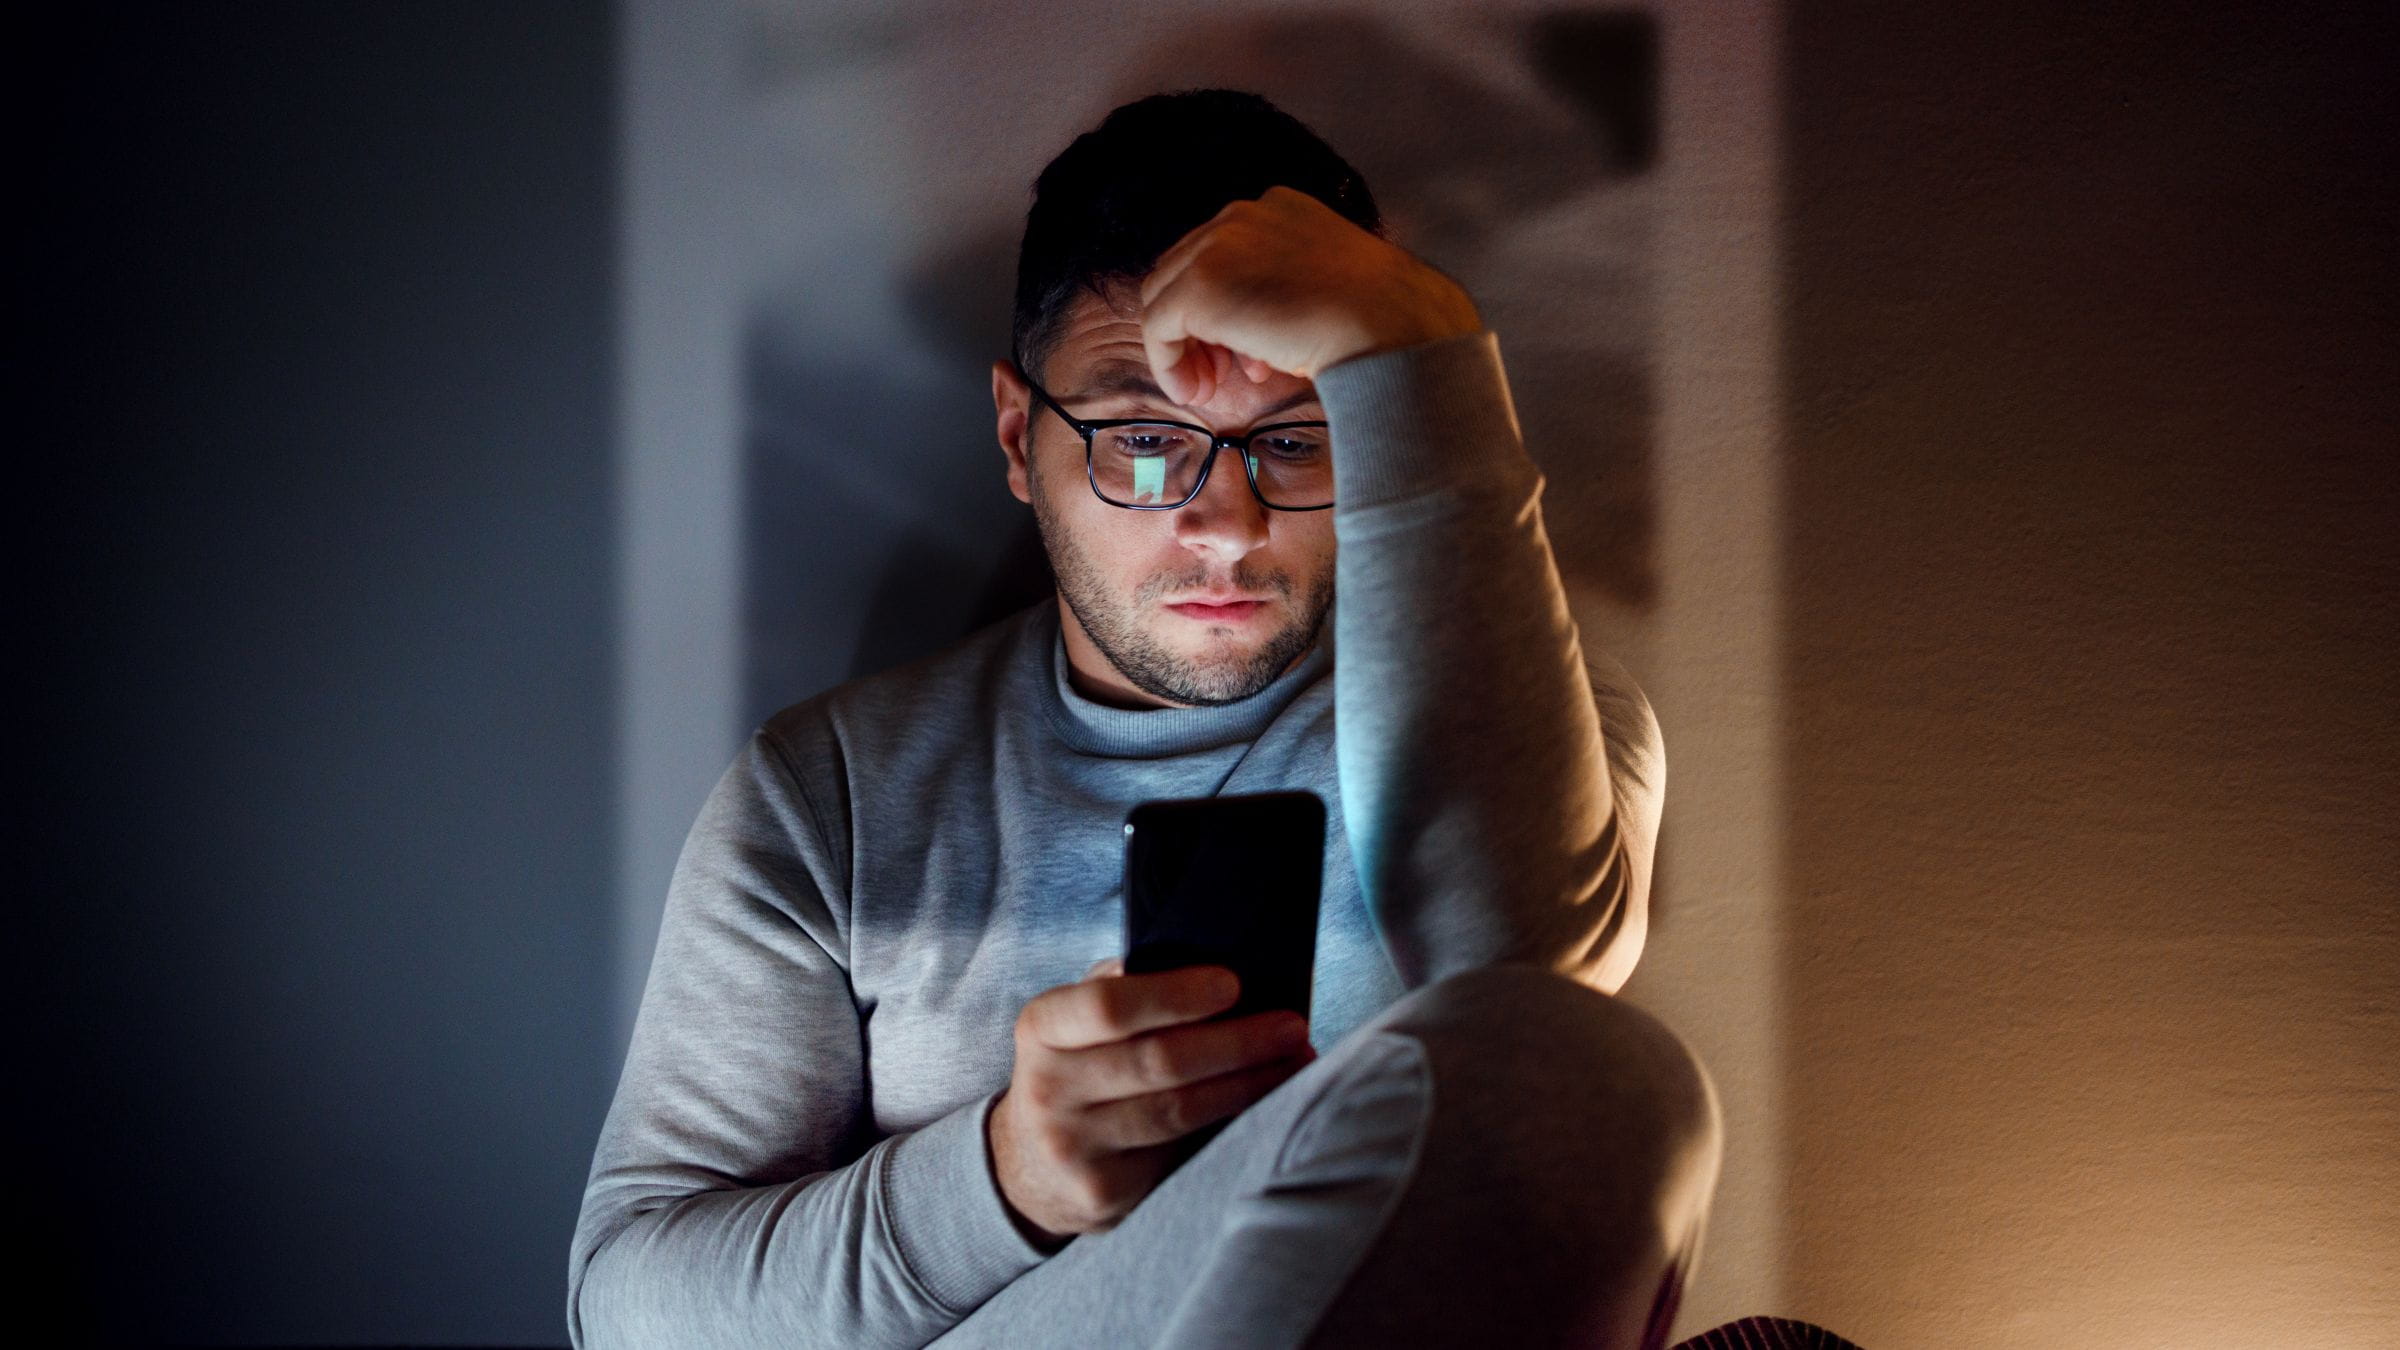 Stressed man sitting in the dark looking at his phone